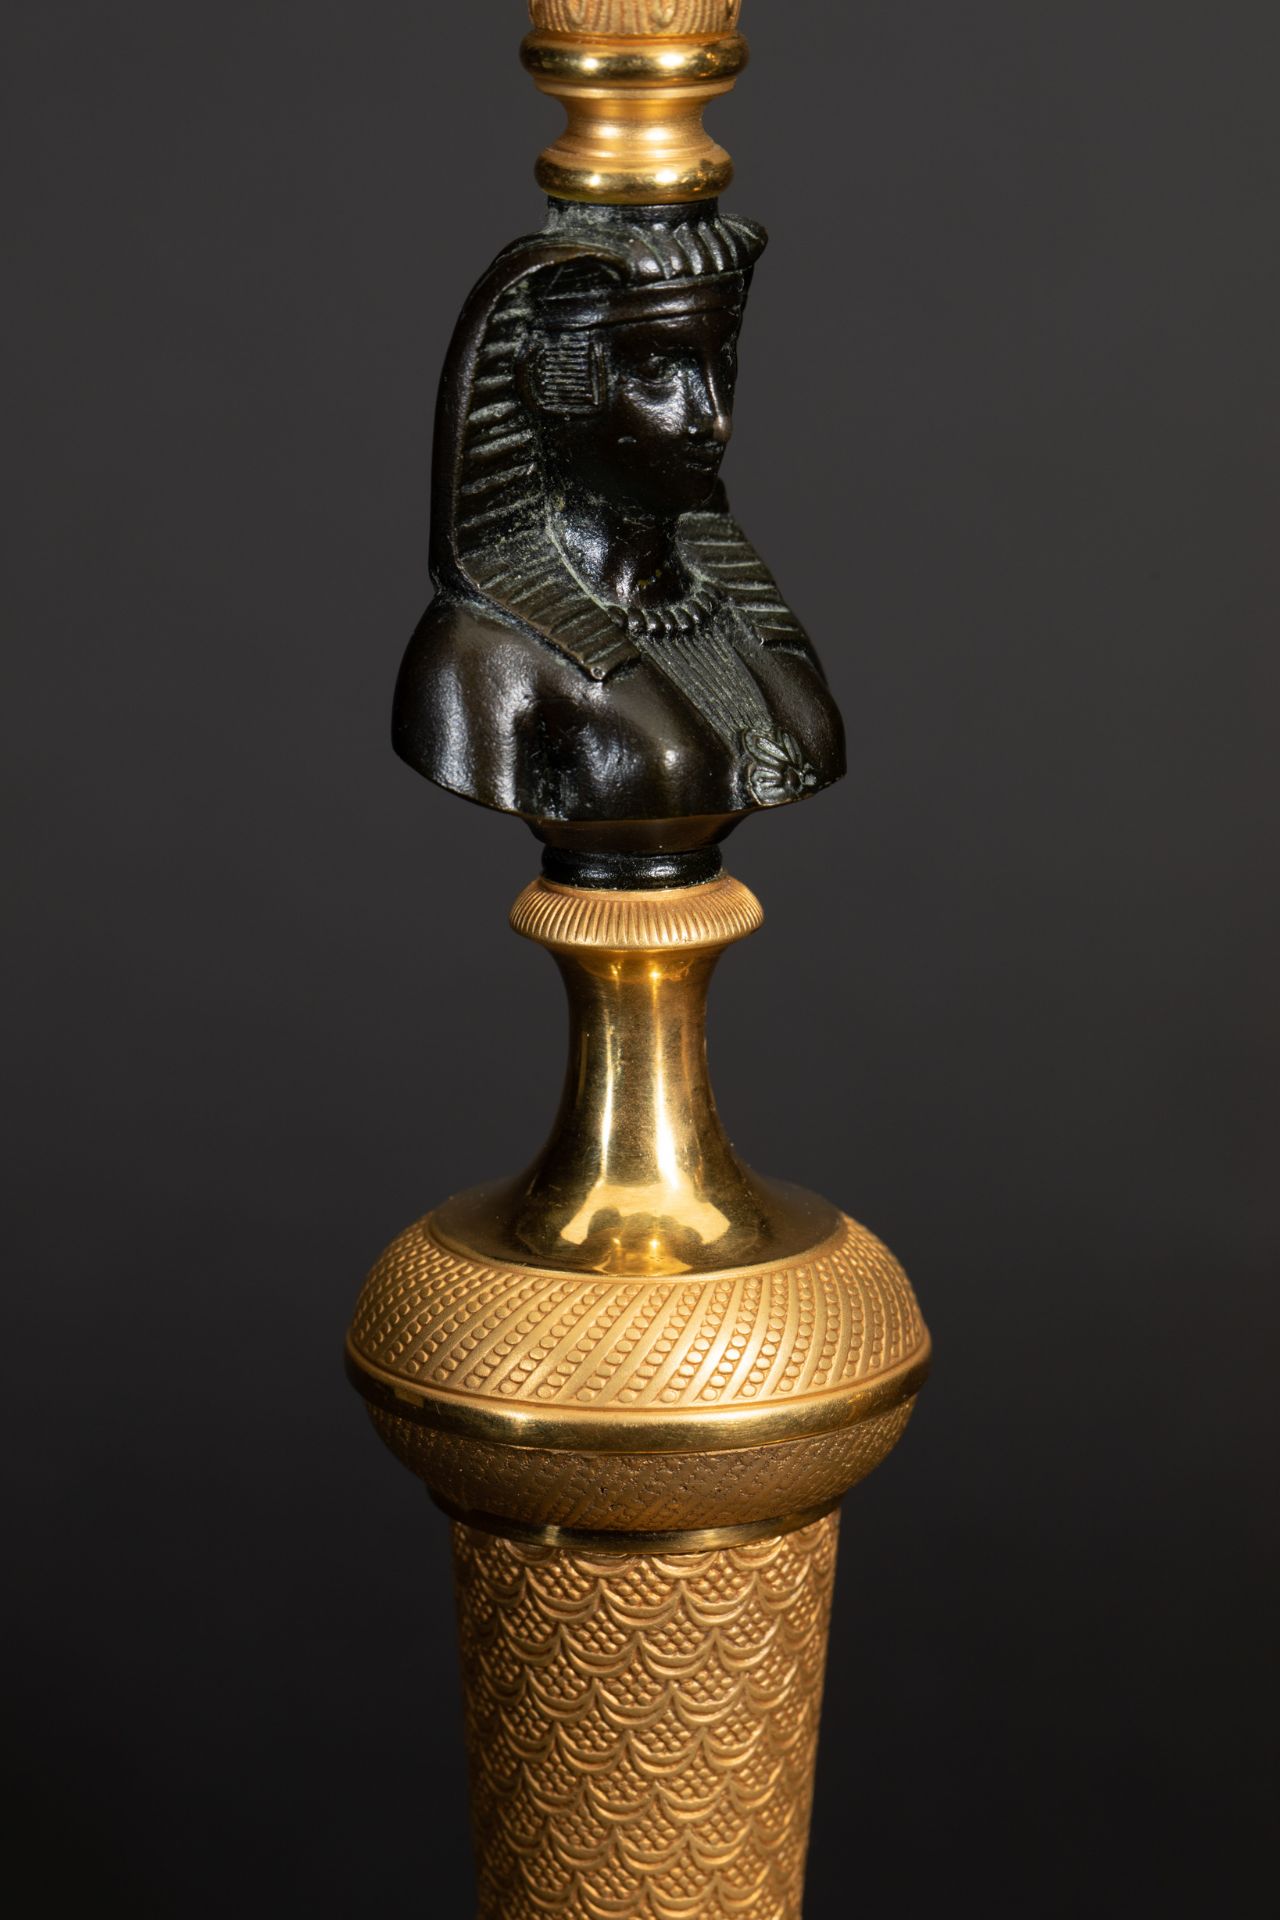 2 Empire candlesticks in egyptian style - Image 2 of 3